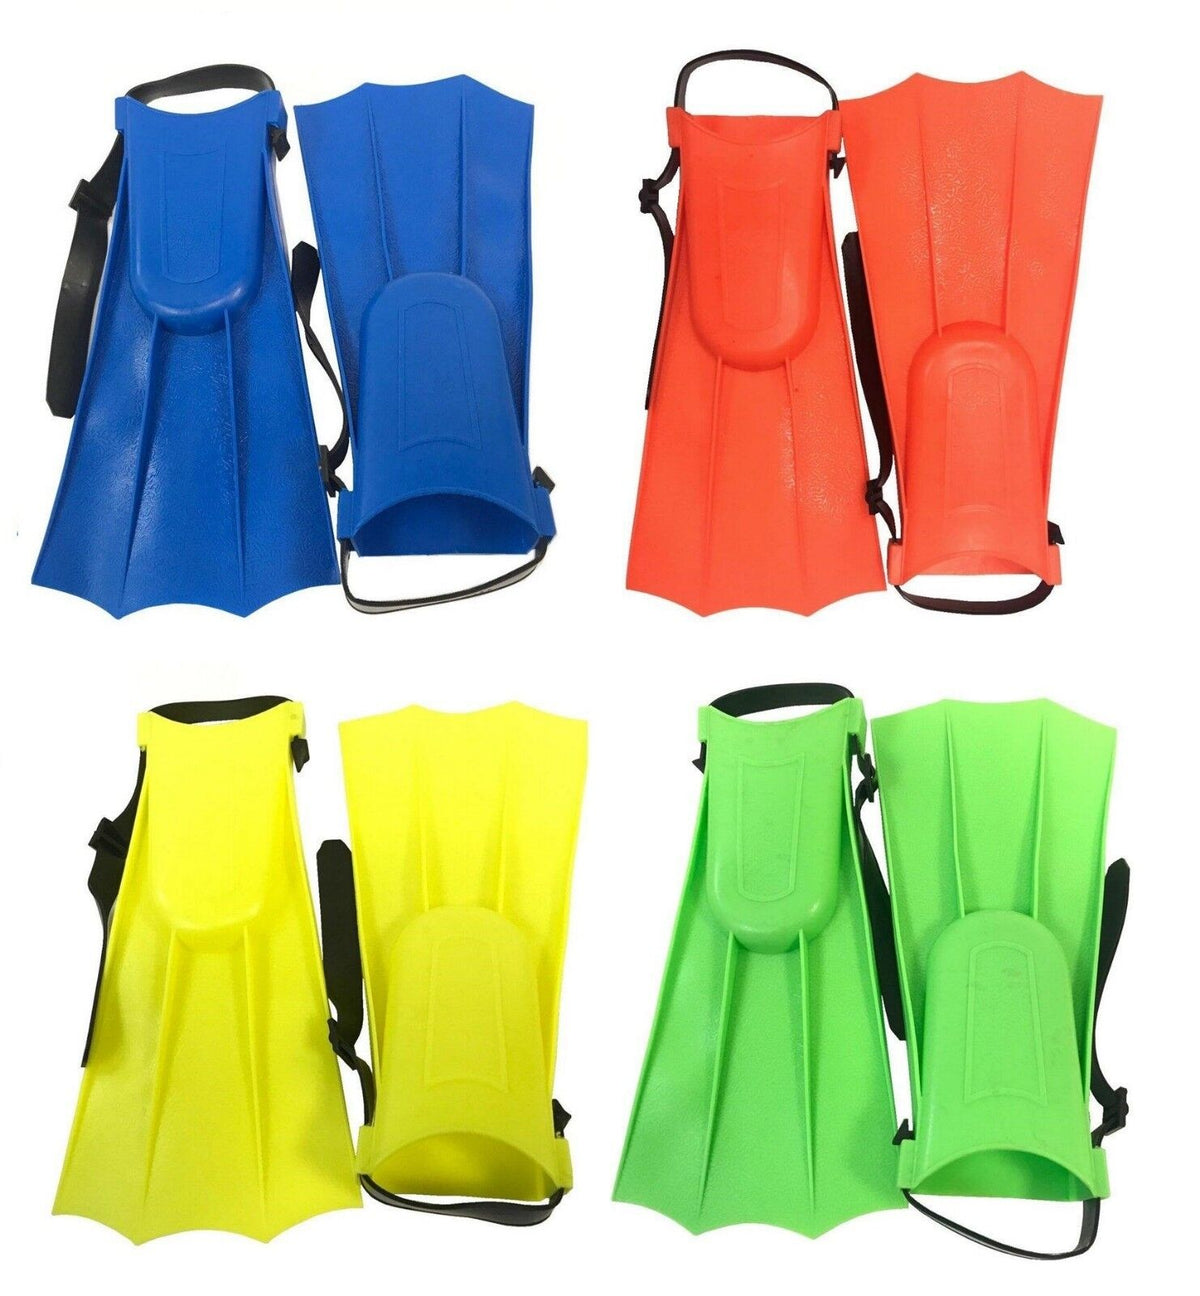 Short Fins for Swimming